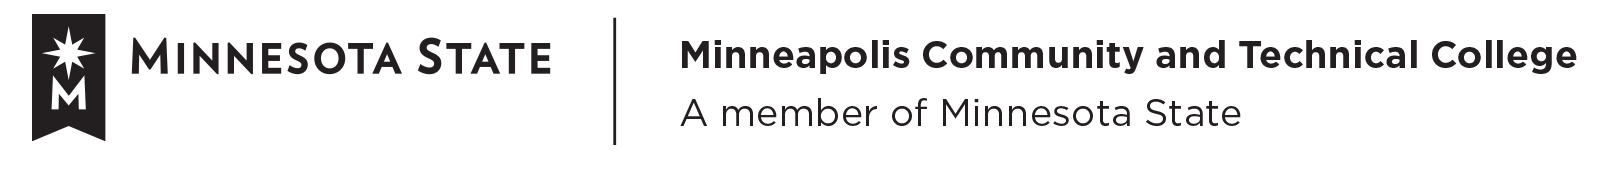 Minneapolis Community and Technical College, a member of Minnesota State